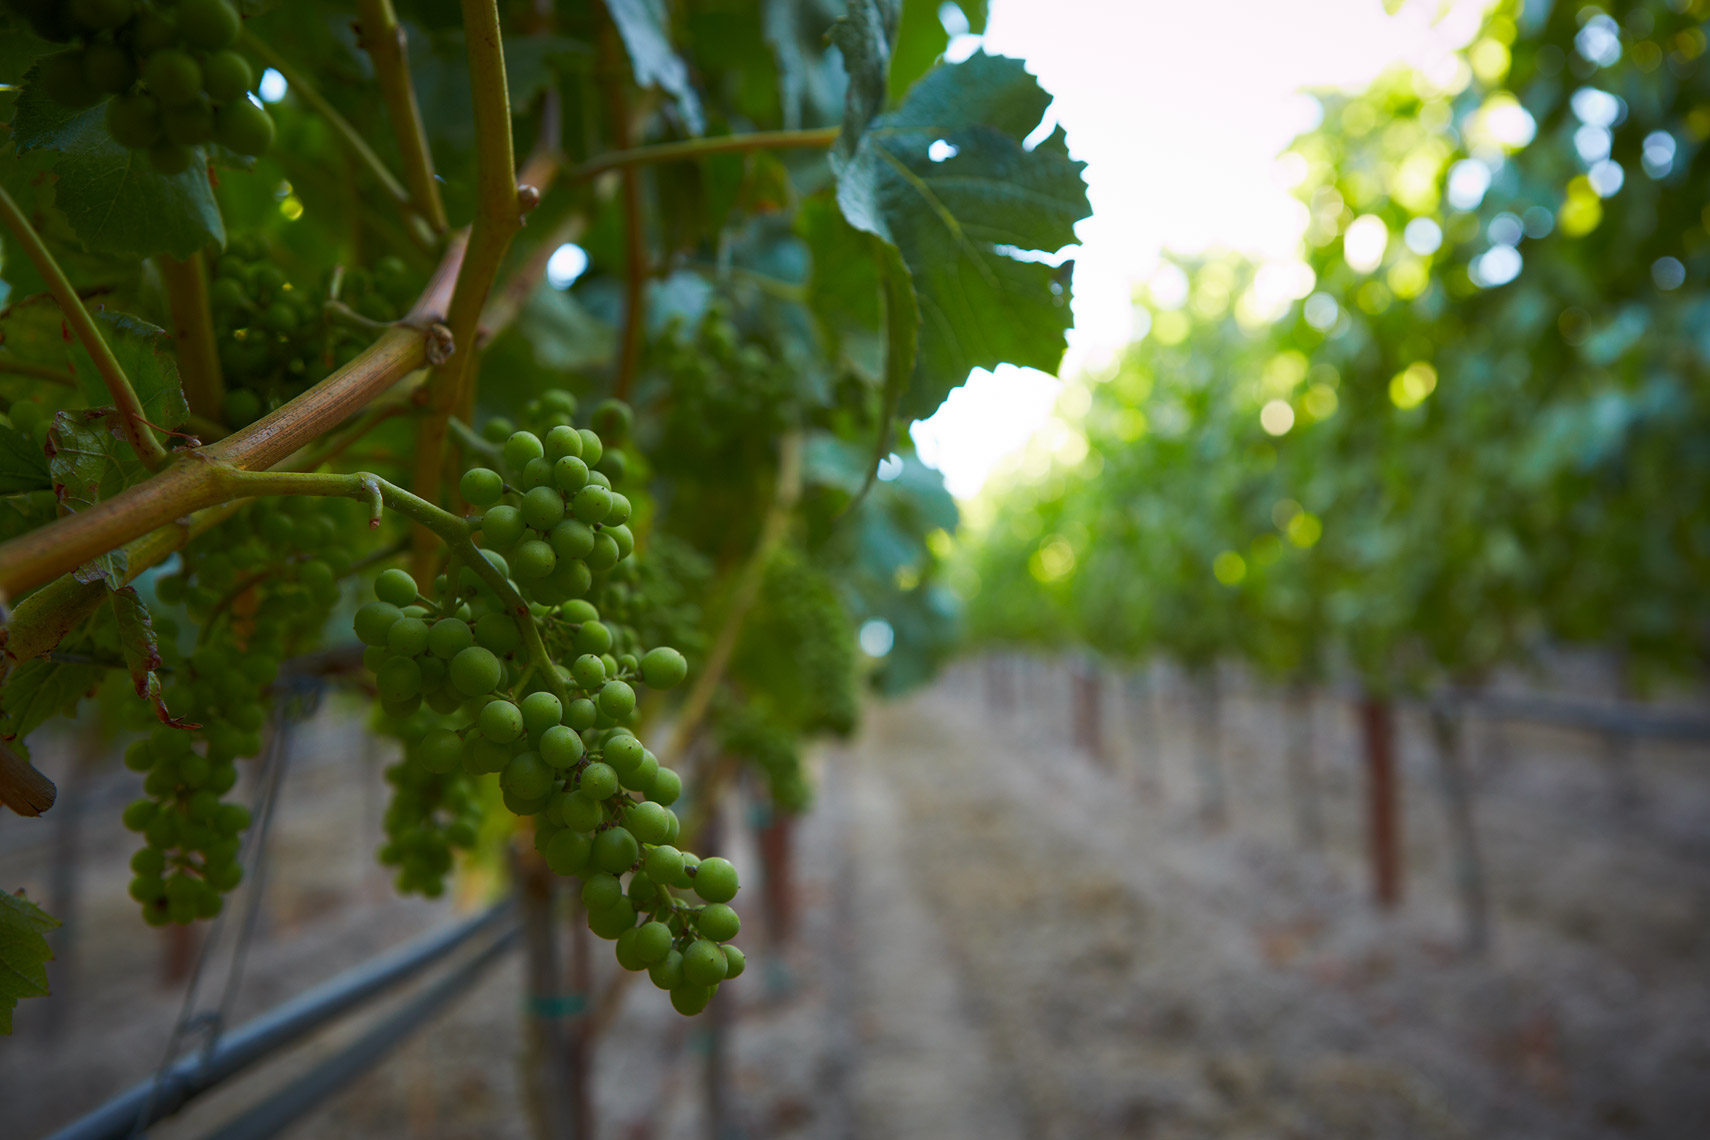 AlanCampbellPhotography, grapes on the vine not long before verasion